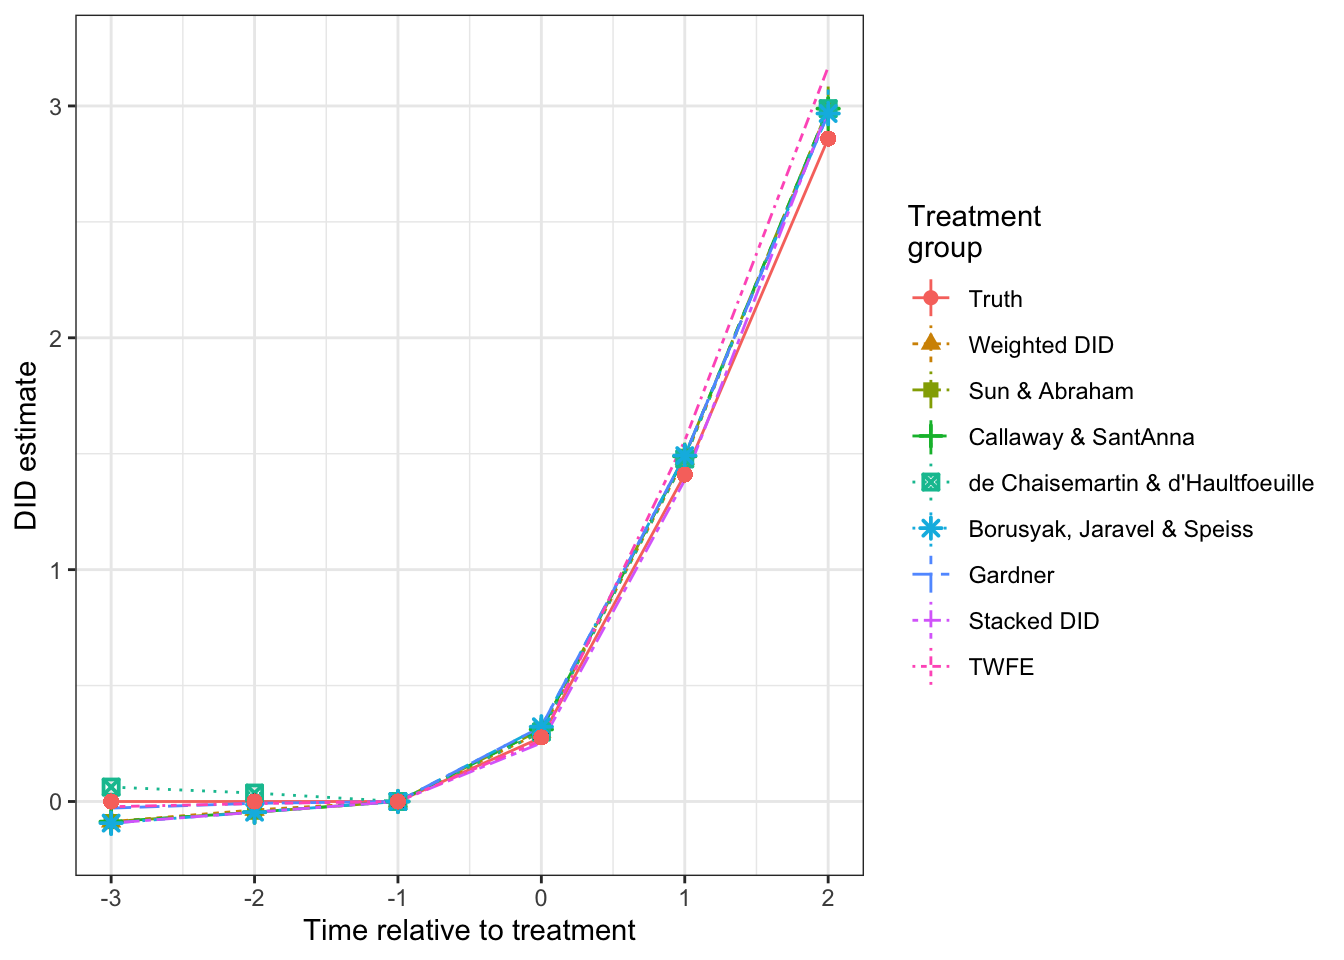 Event study estimates around the treatment date with various methods (reference period $\tau'=1$)